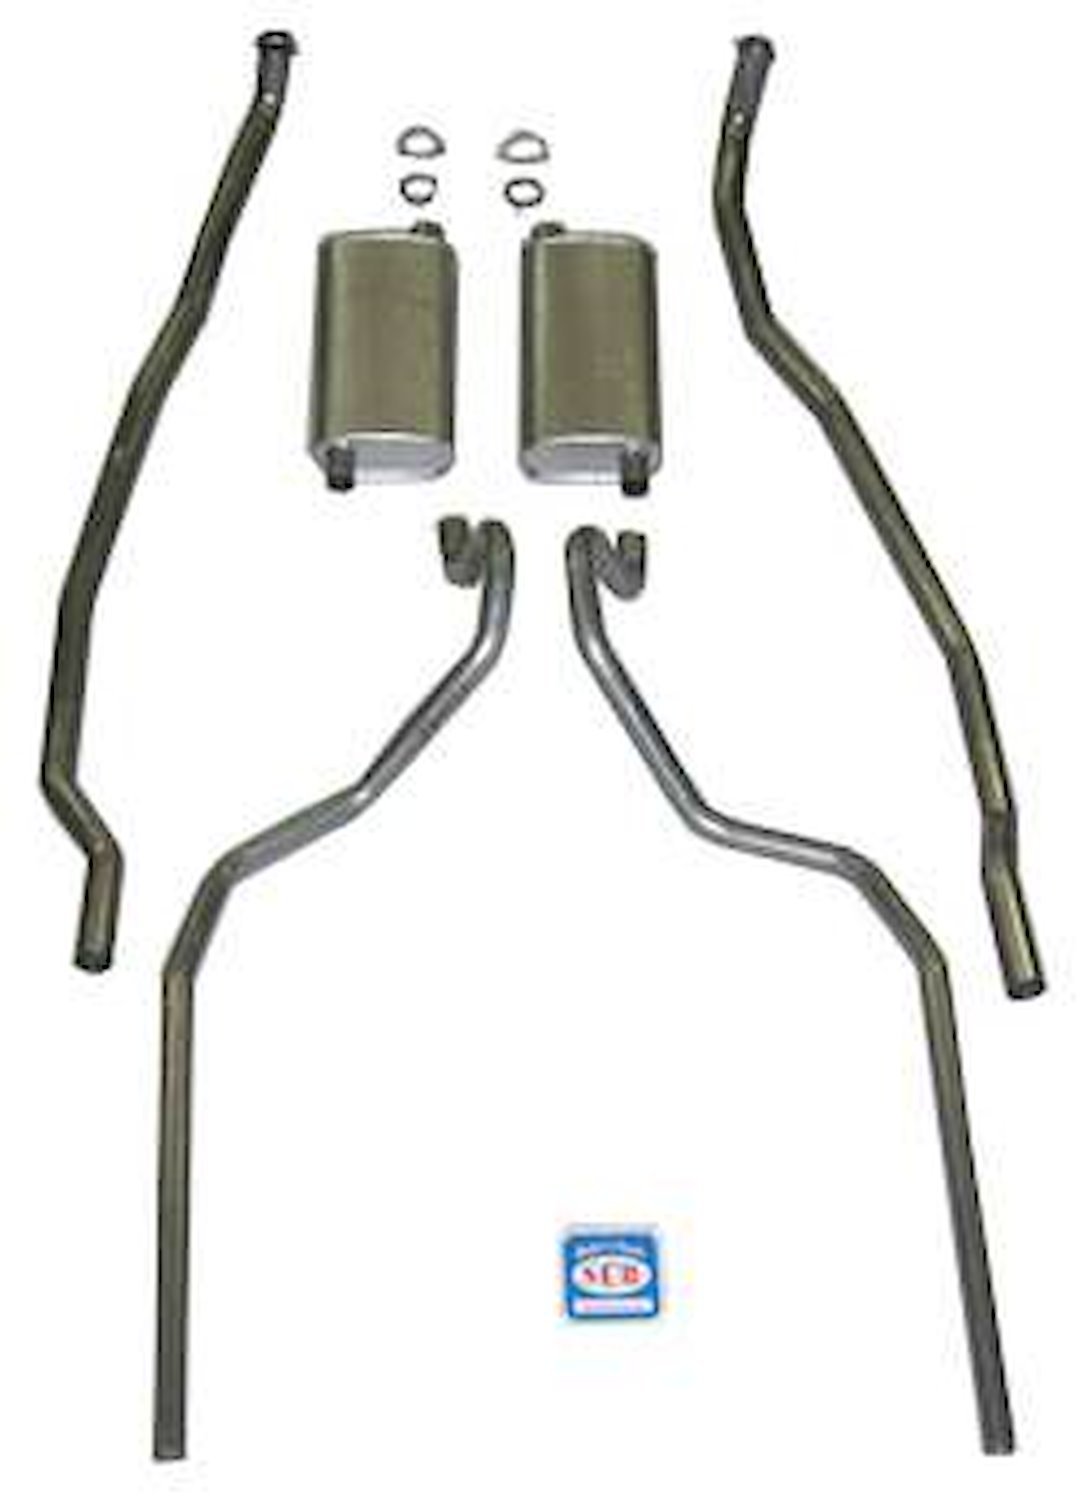 73068 1965-66 Chevrolet Full-Size Exhaust System 8-cyl 396 & 427 Dual